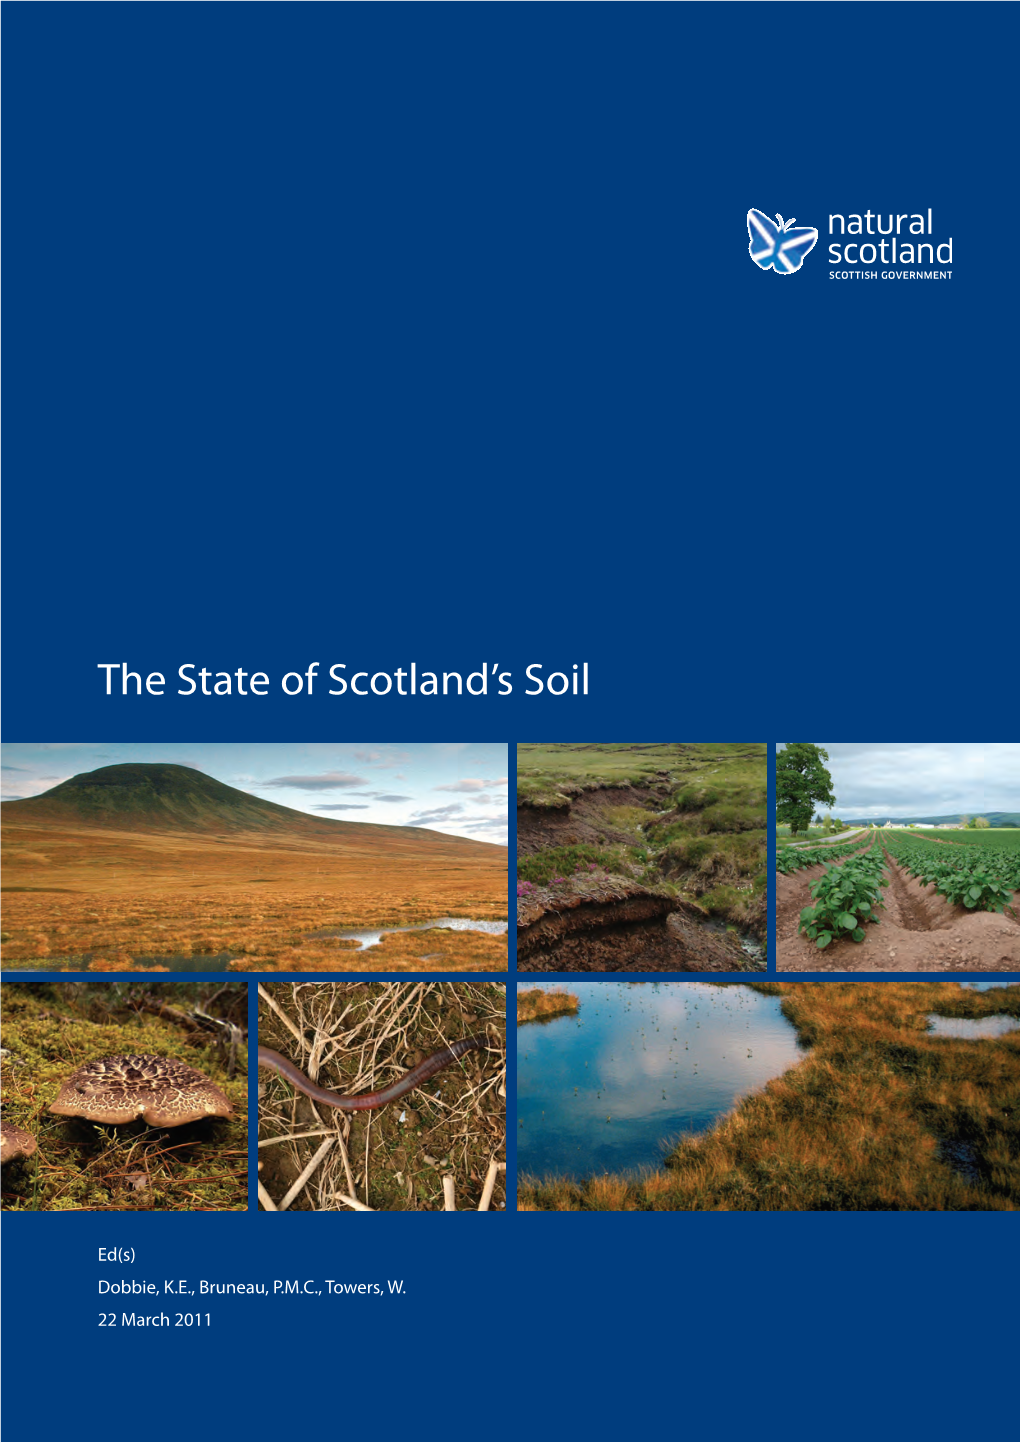 State of Scotland's Soil Report